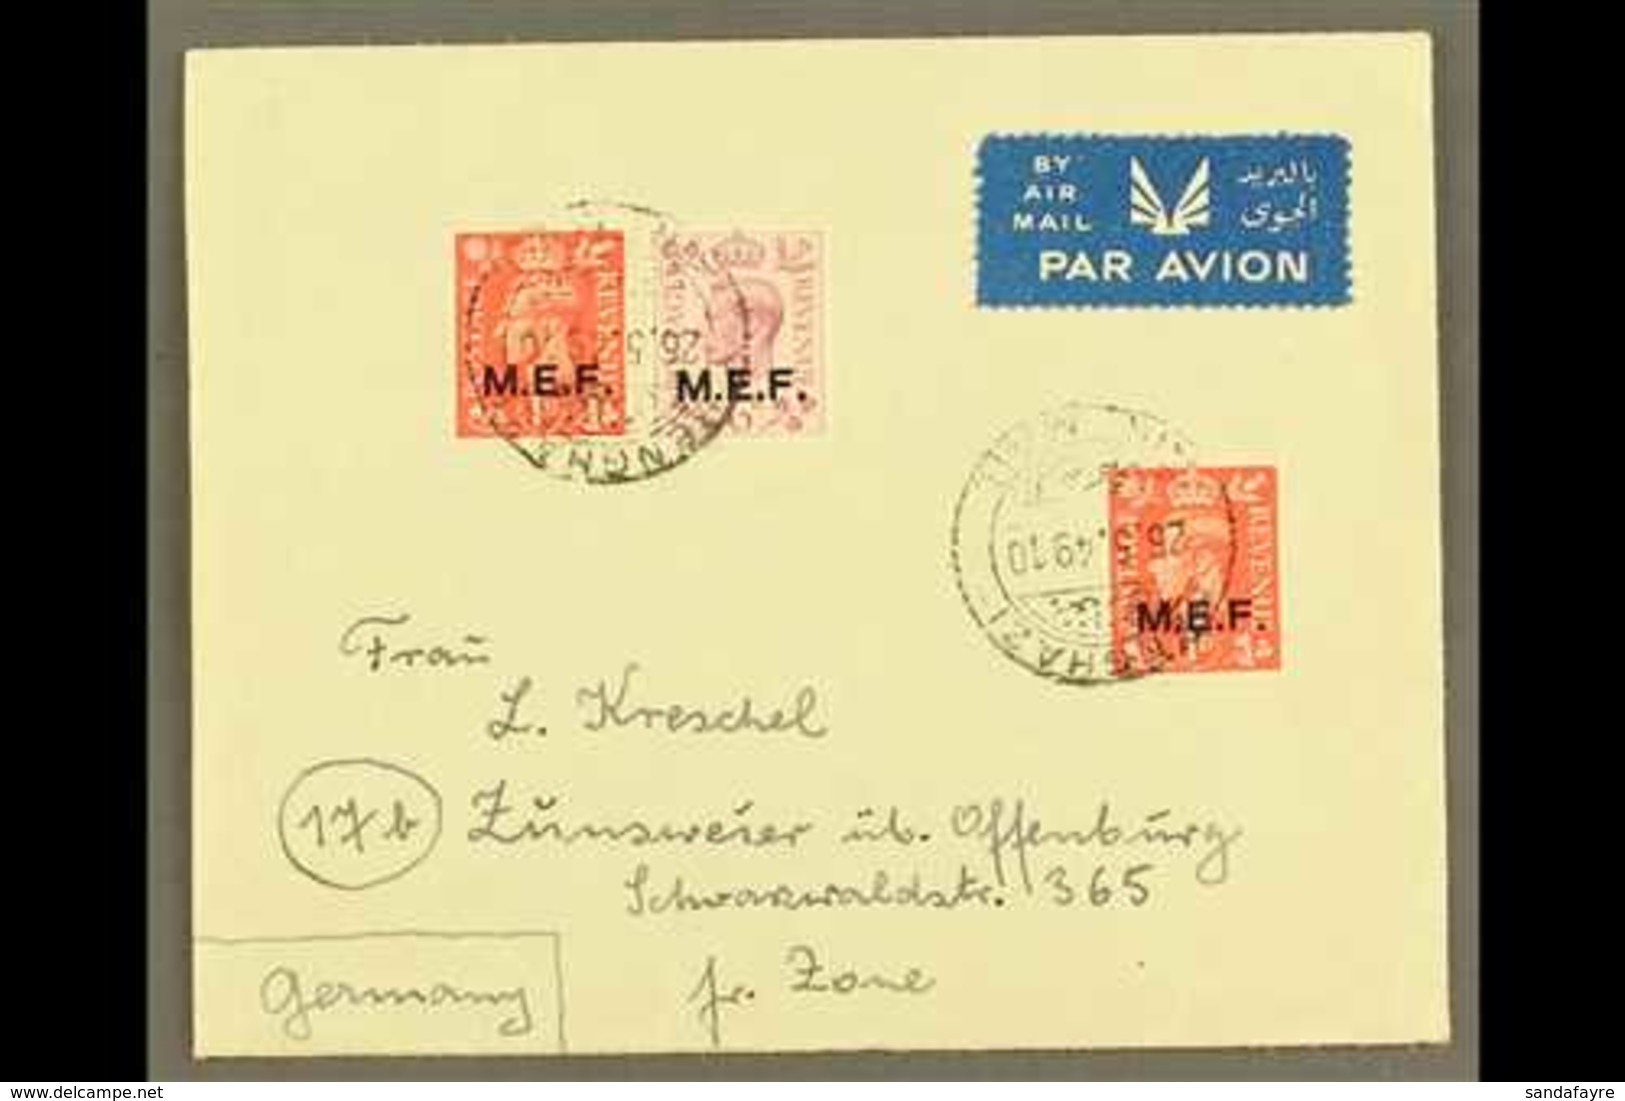 CYRENAICA 1949 Airmailed Cover To French Zone, Germany, Franked KGVI 1d X2 & 6d "M.E.F." Ovpts, SG M11, M16, Benghazi 26 - Africa Oriental Italiana